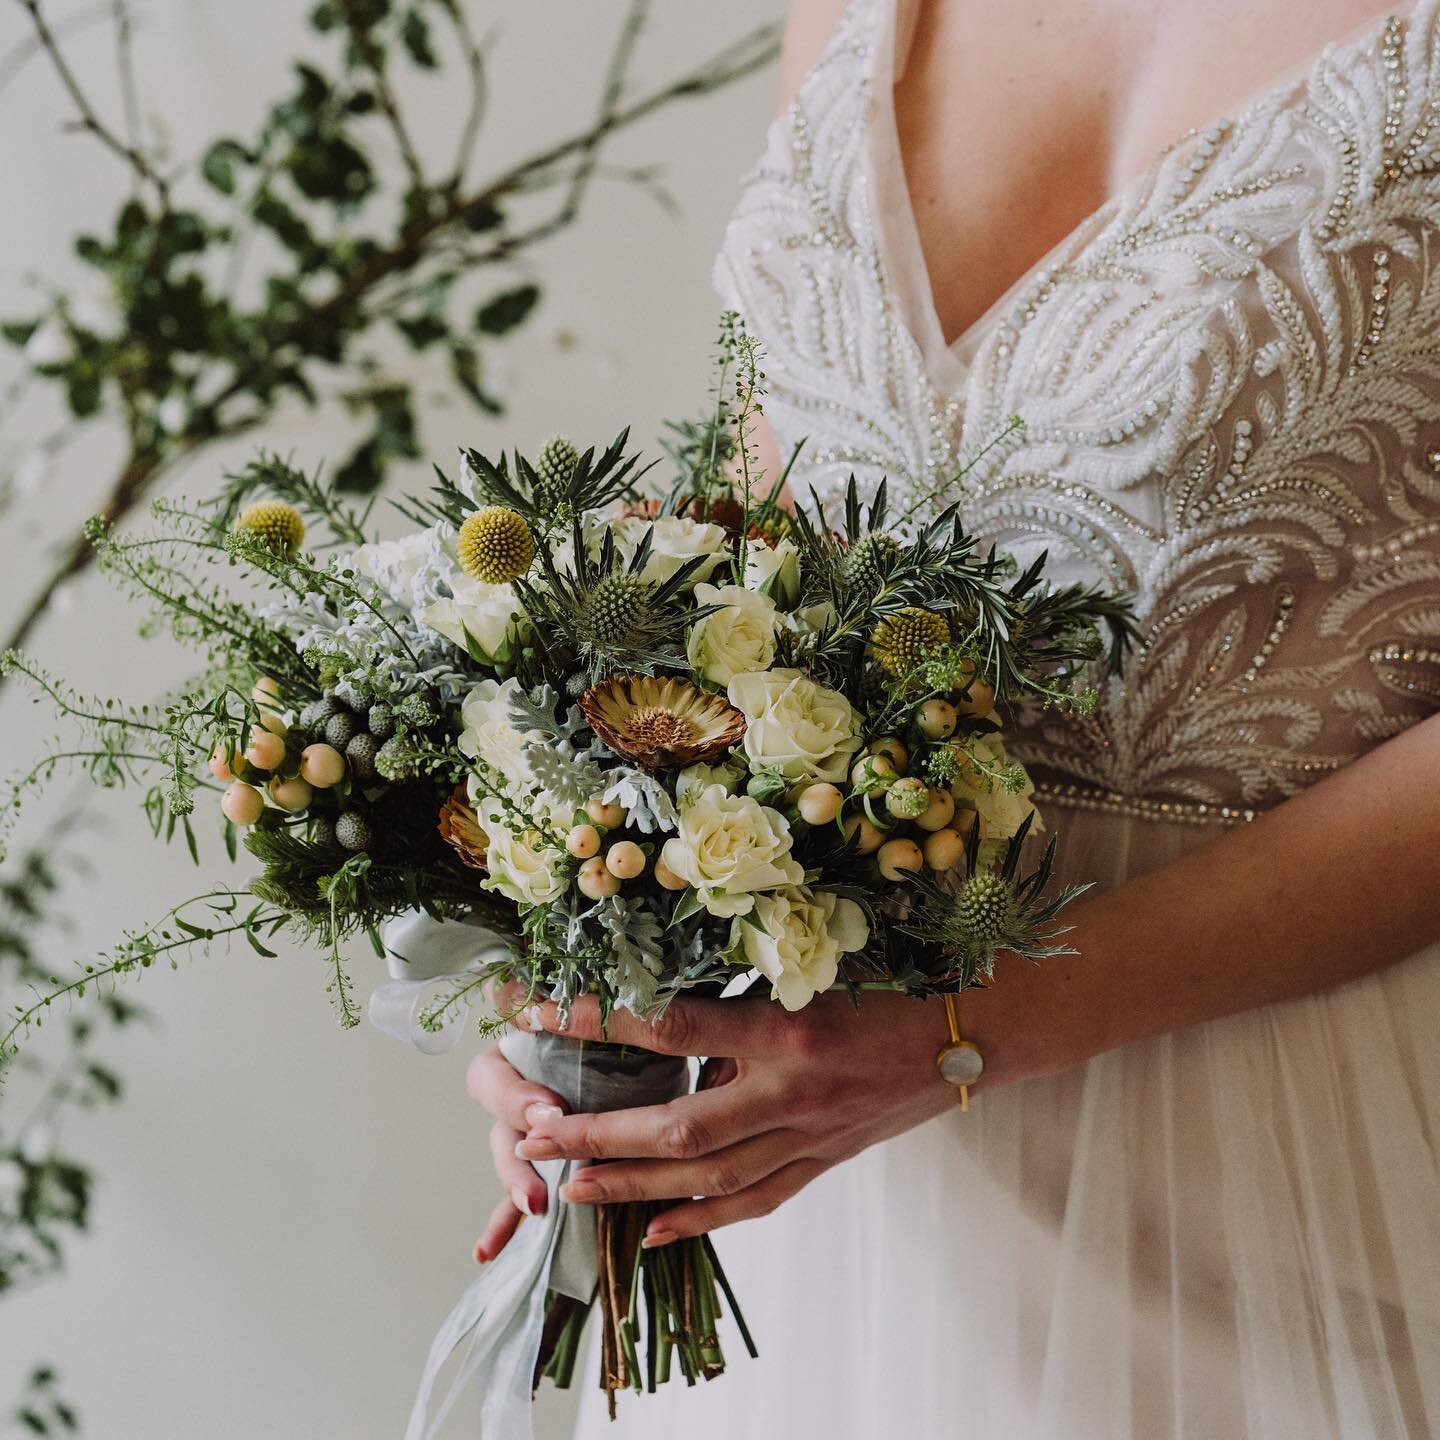 Choosing the best wedding florist for you. (Me of course!) — Church Park Flowers